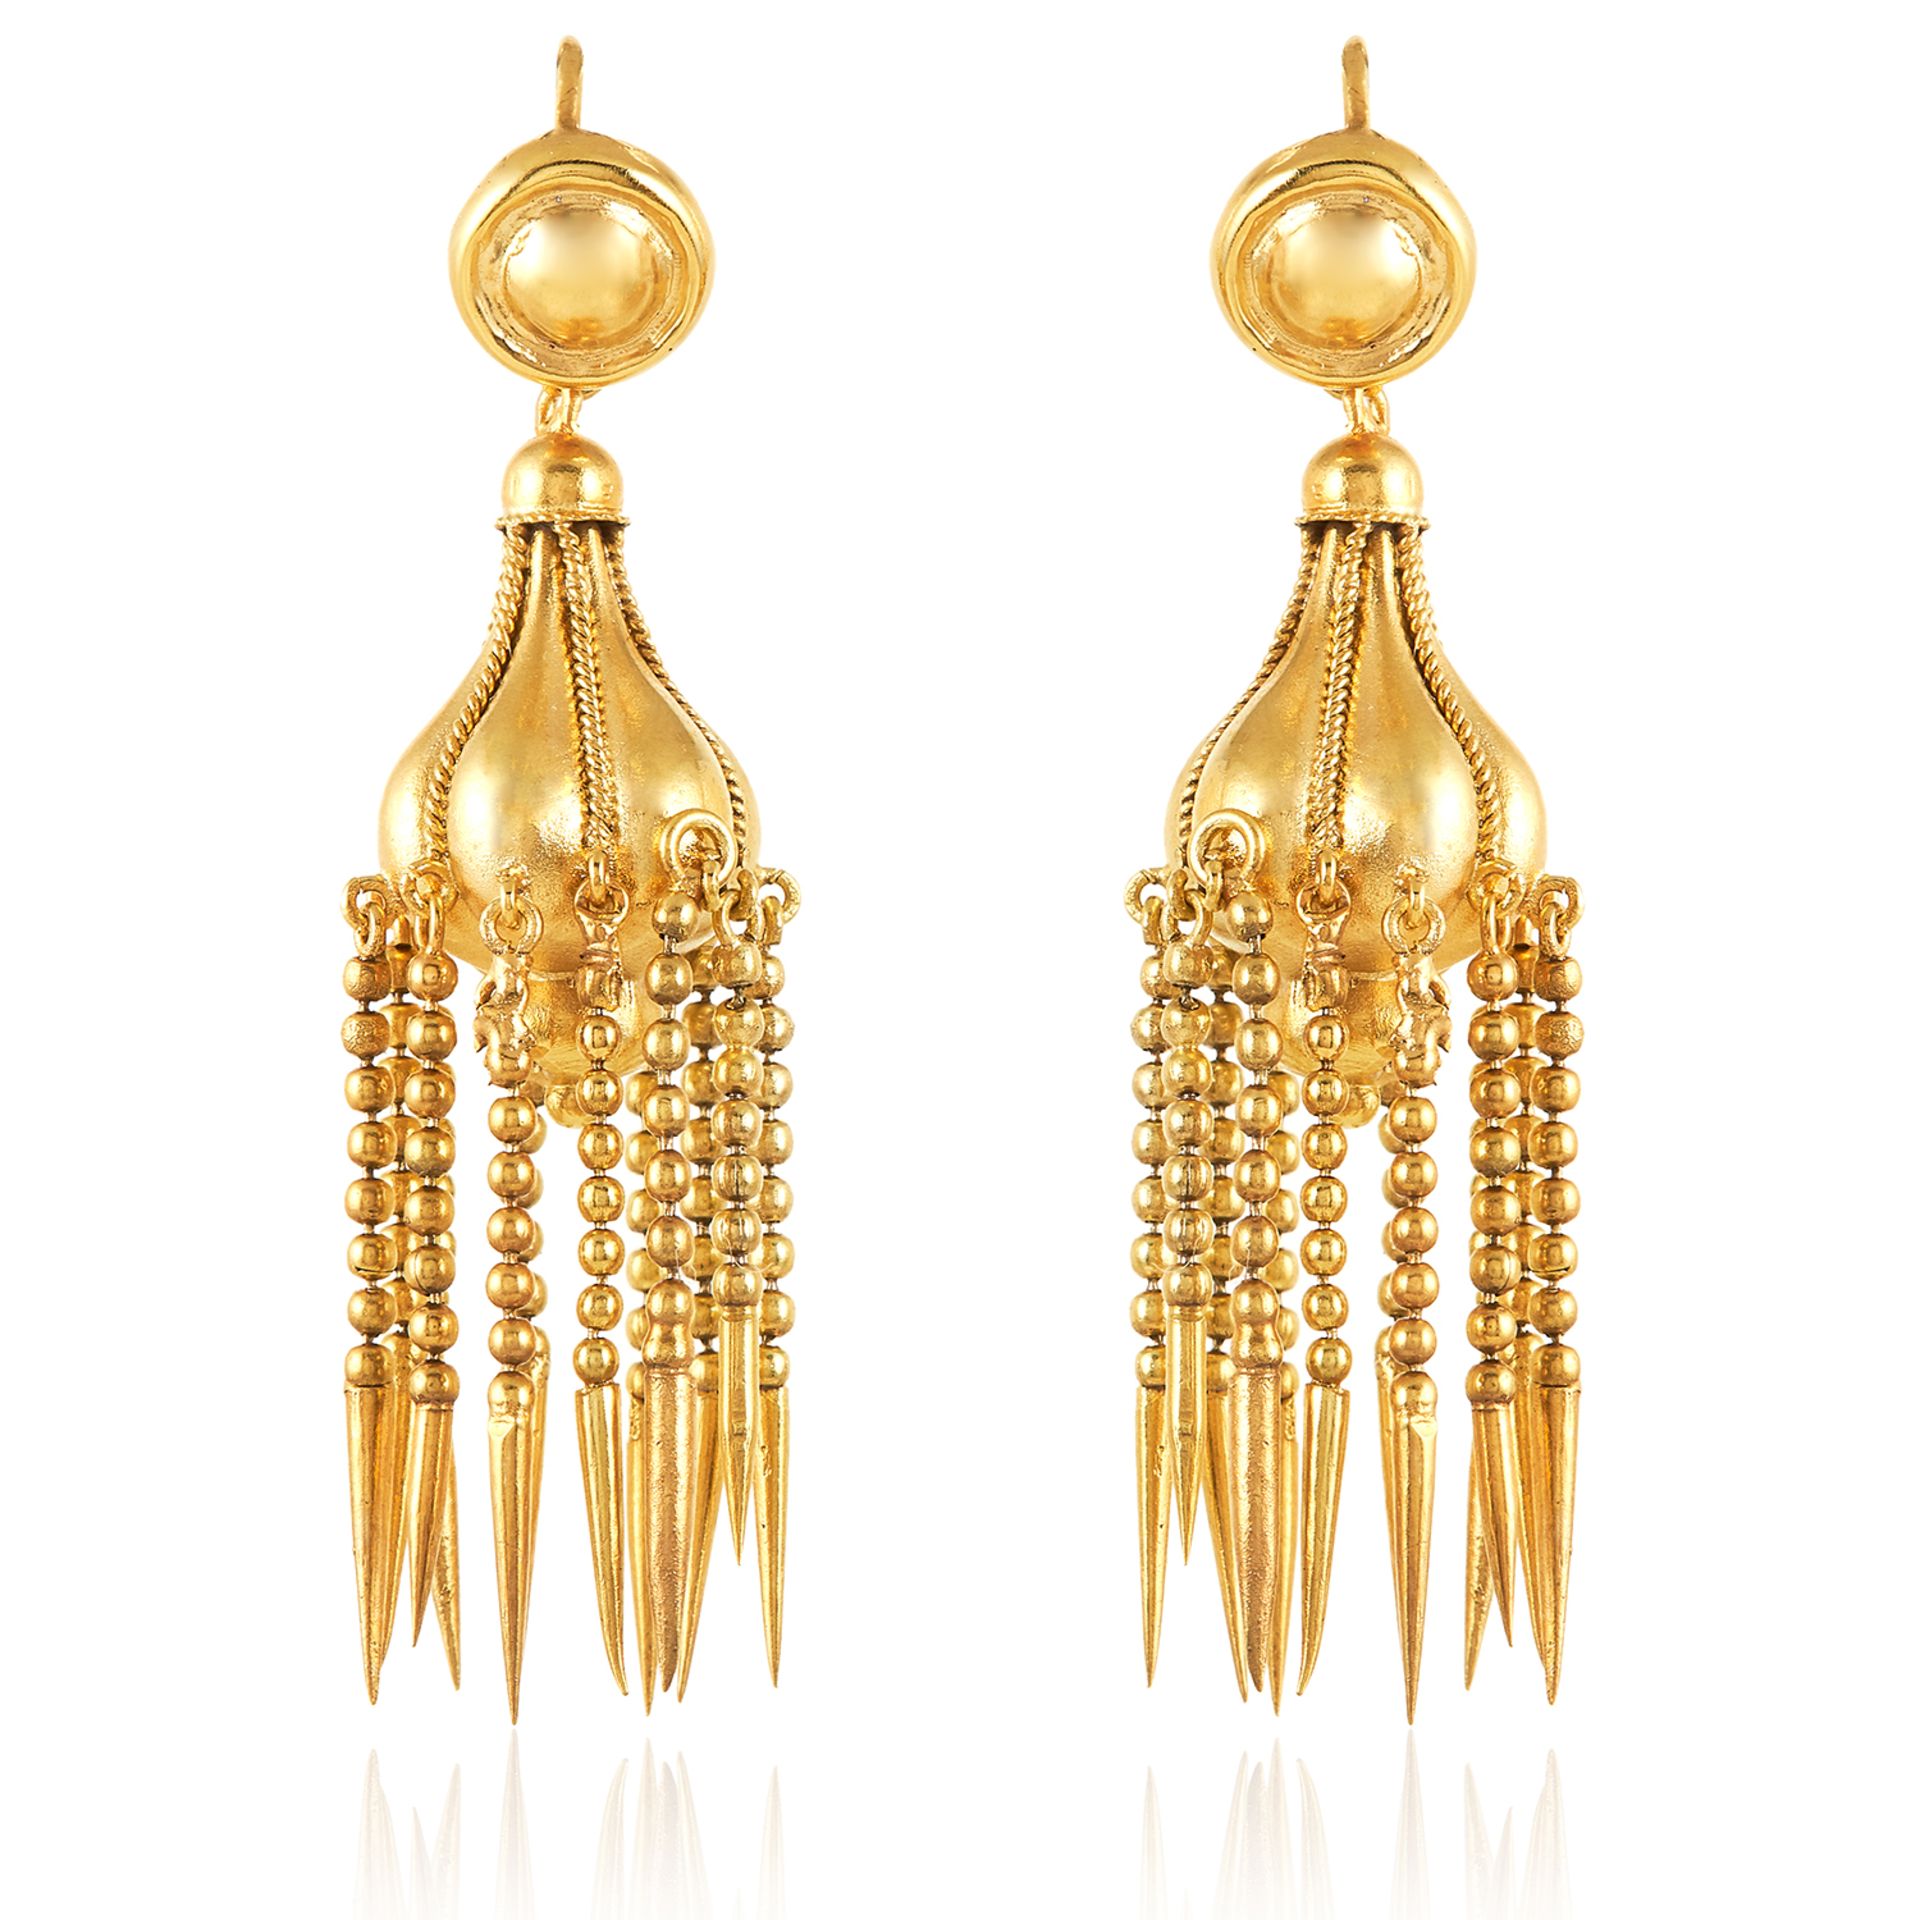 A PAIR OF ANTIQUE ARTICULATED TASSEL EARRINGS, 19TH CENTURY each designed as a lobed drop with